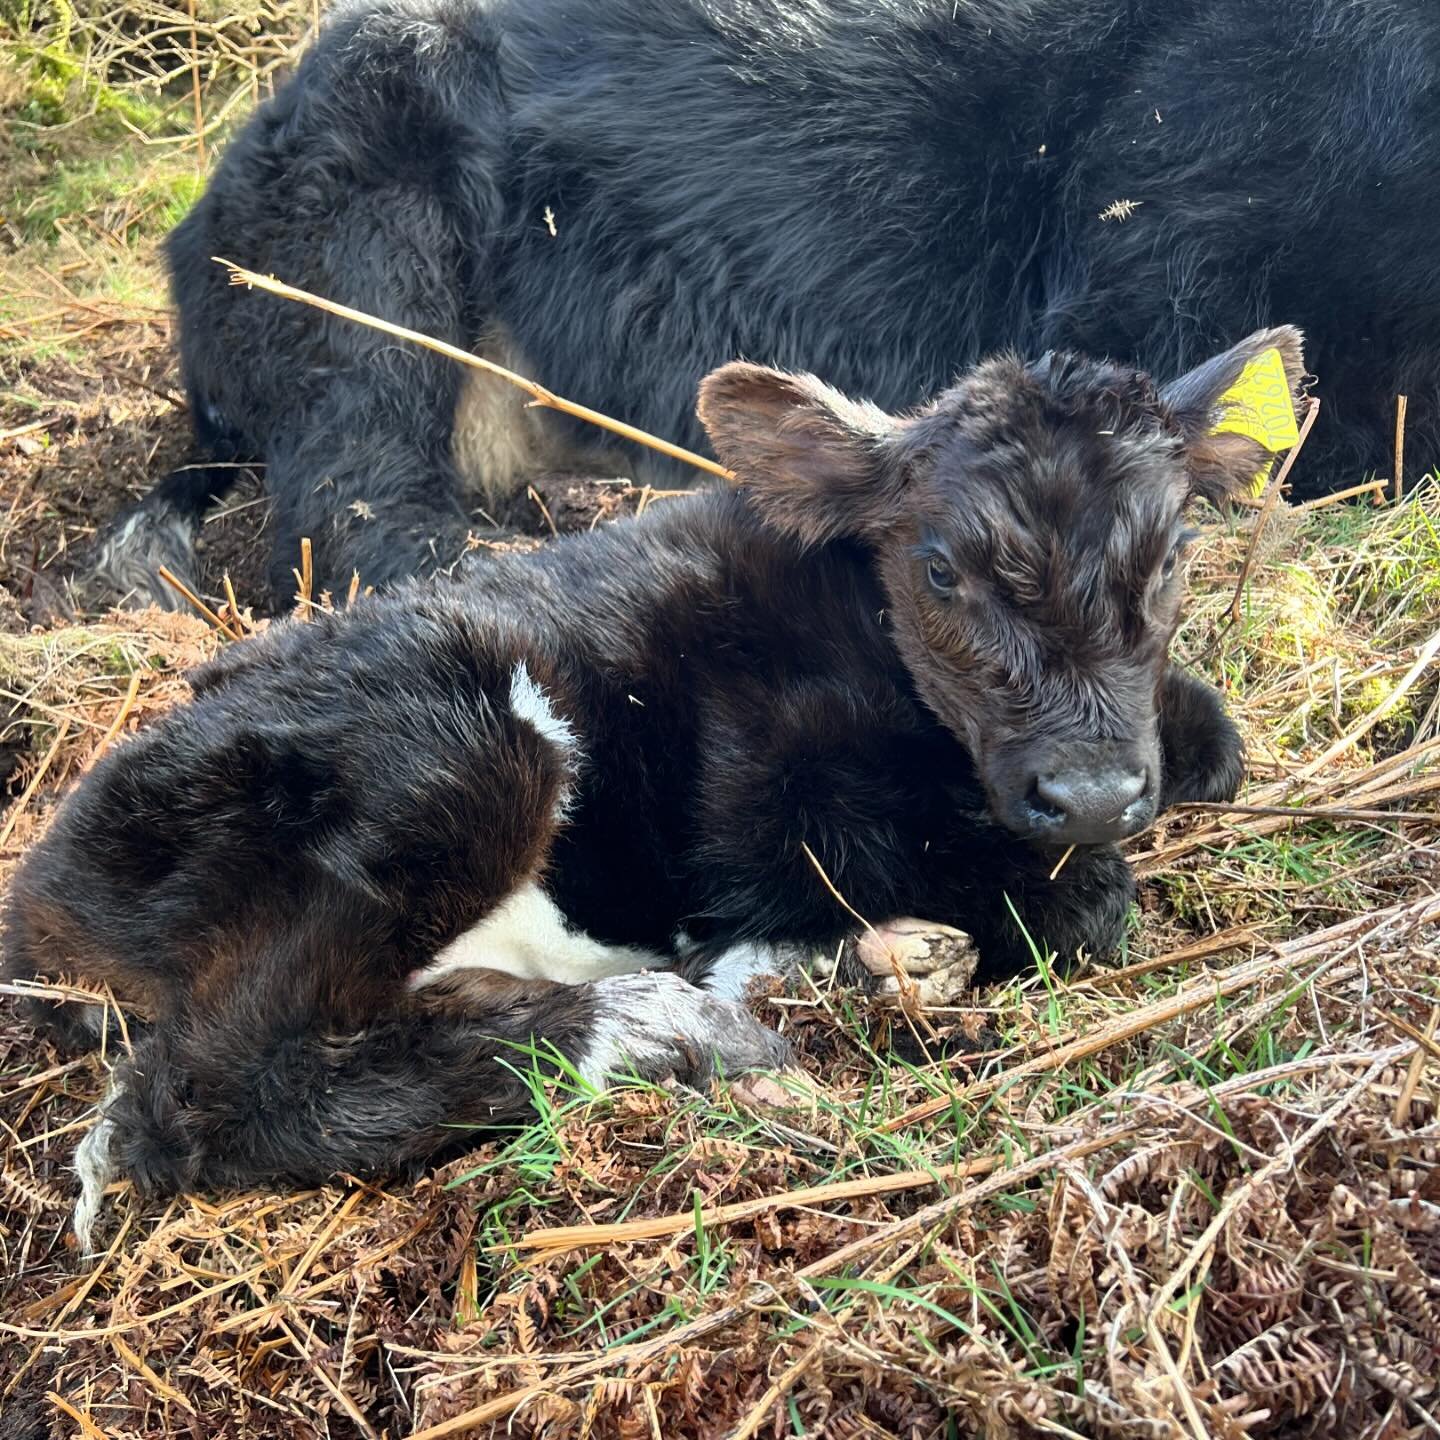 Calving is well under way at Woodneuk, the sun even came out for this little one yesterday ☀️🥰
&bull;
&bull;
&bull;
&bull;
#highlandcow #highlandcows #highlandcattle  #highlander #shorthorn #calf #calvingseason #calving #cow #cows #cattle #cowsofins